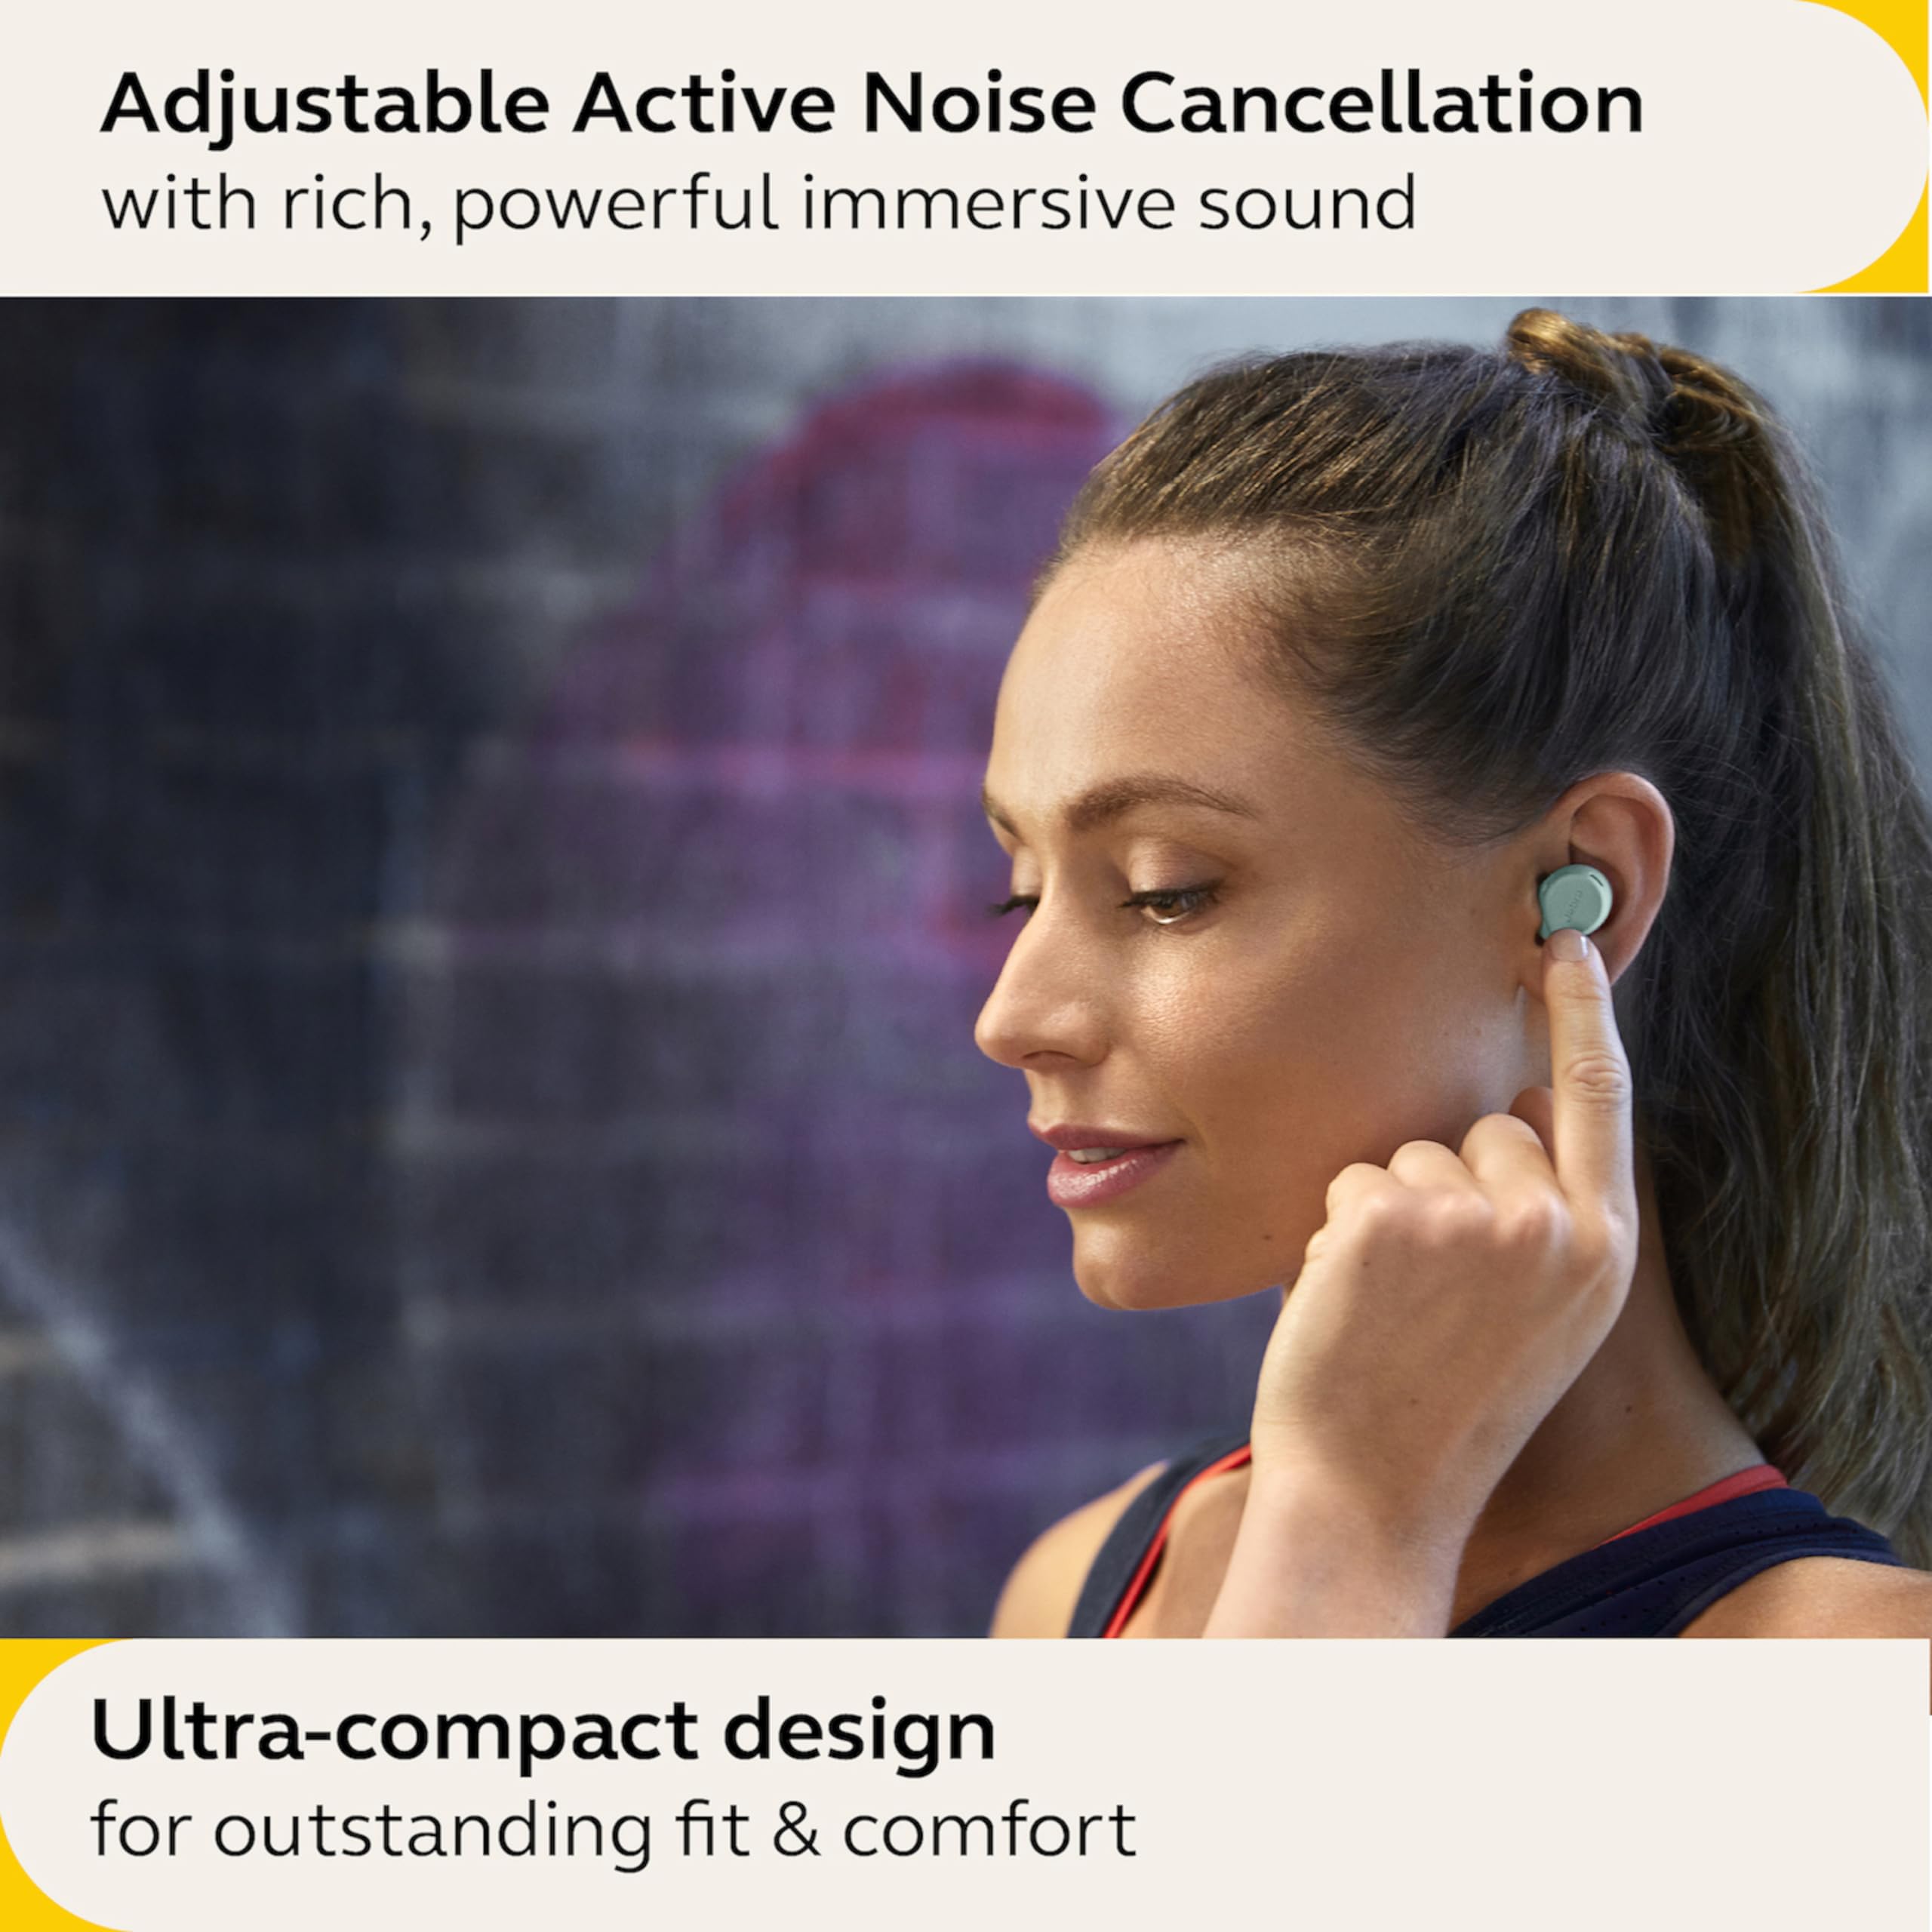 Jabra Elite 7 Active in-Ear Bluetooth Earbuds - True Wireless Sports Ear Buds ShakeGrip for The Ultimate Active fit and Adjustable Active Noise Cancellation - Mint